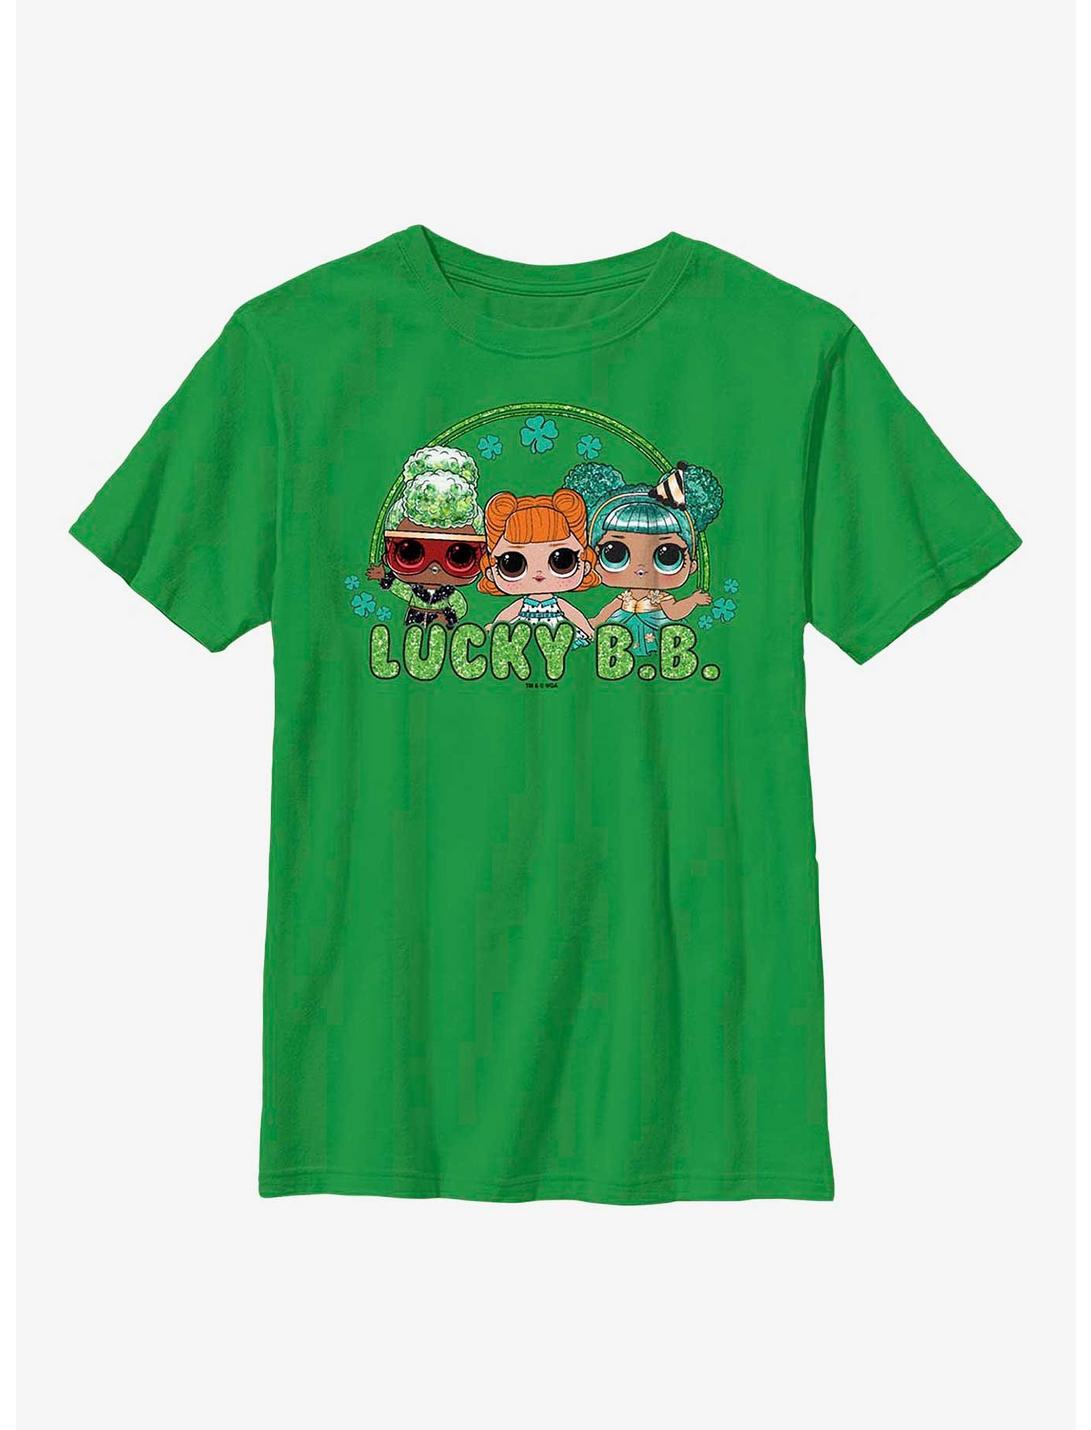 L.O.L. Surprise Lucky BB Squad Youth T-Shirt, KELLY, hi-res